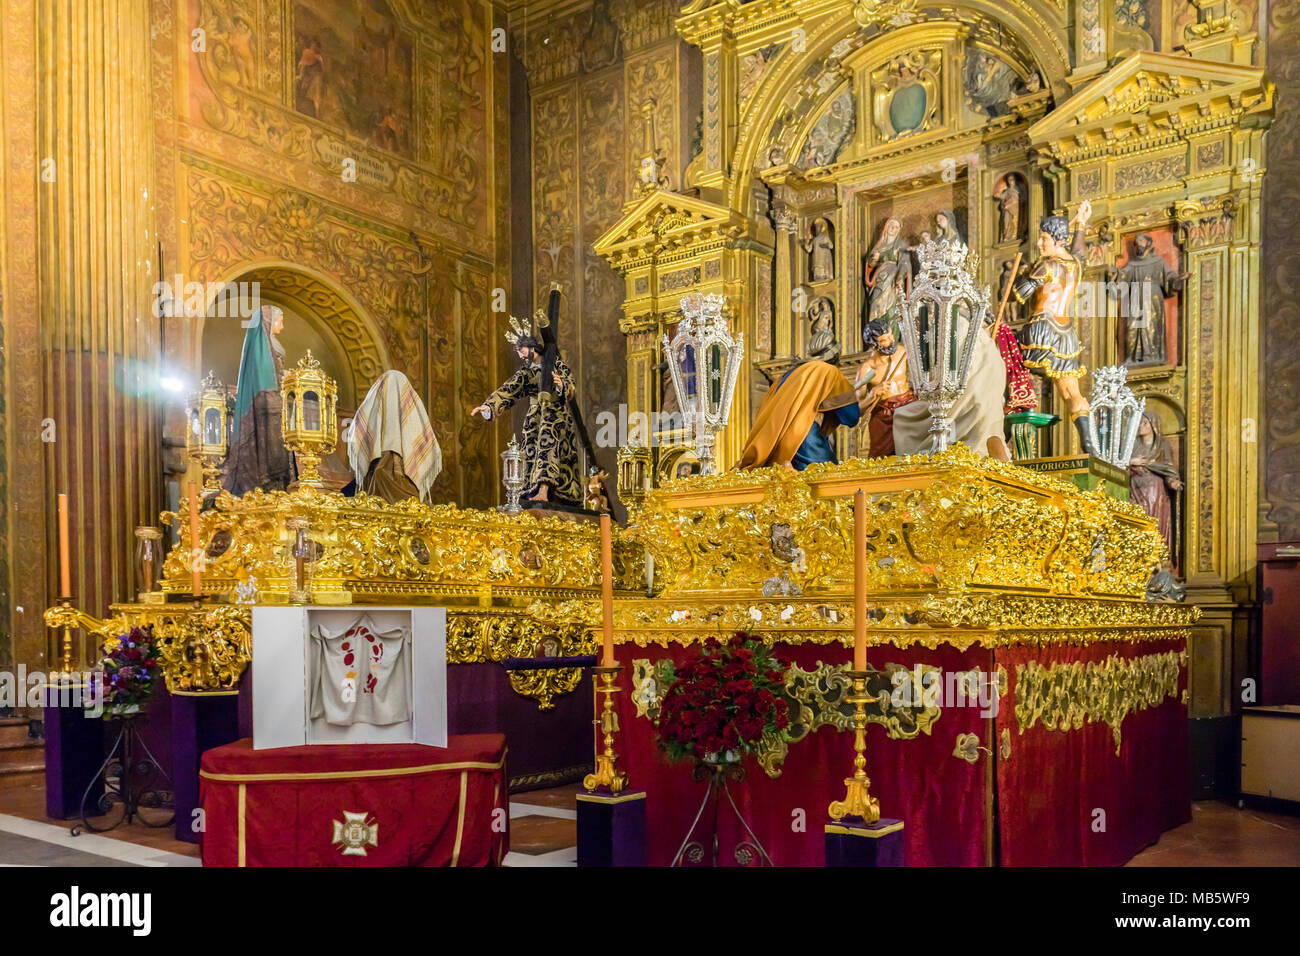 Interior of the Annunciation Church (Iglesia de la Anunciacion) just before Holy Week (semana santa) in the Spanish city of Seville, Andalusia, Spain Stock Photo